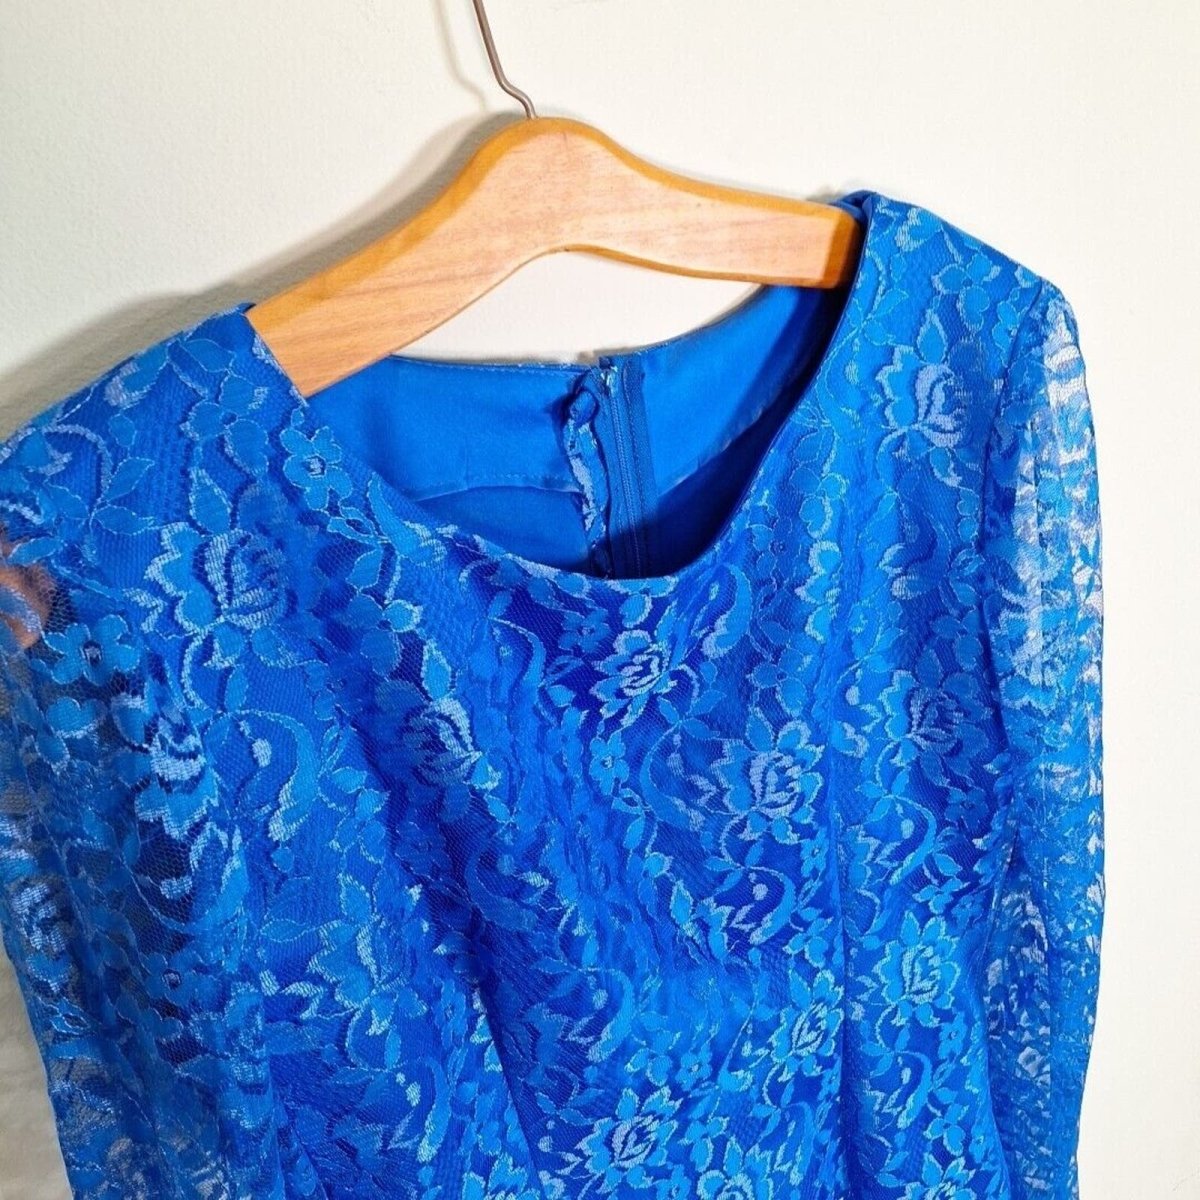 Vintage 70s/80s Blue Lace Sheer Sleeve Maxi Gown Women S/M - themallvintage The Mall Vintage